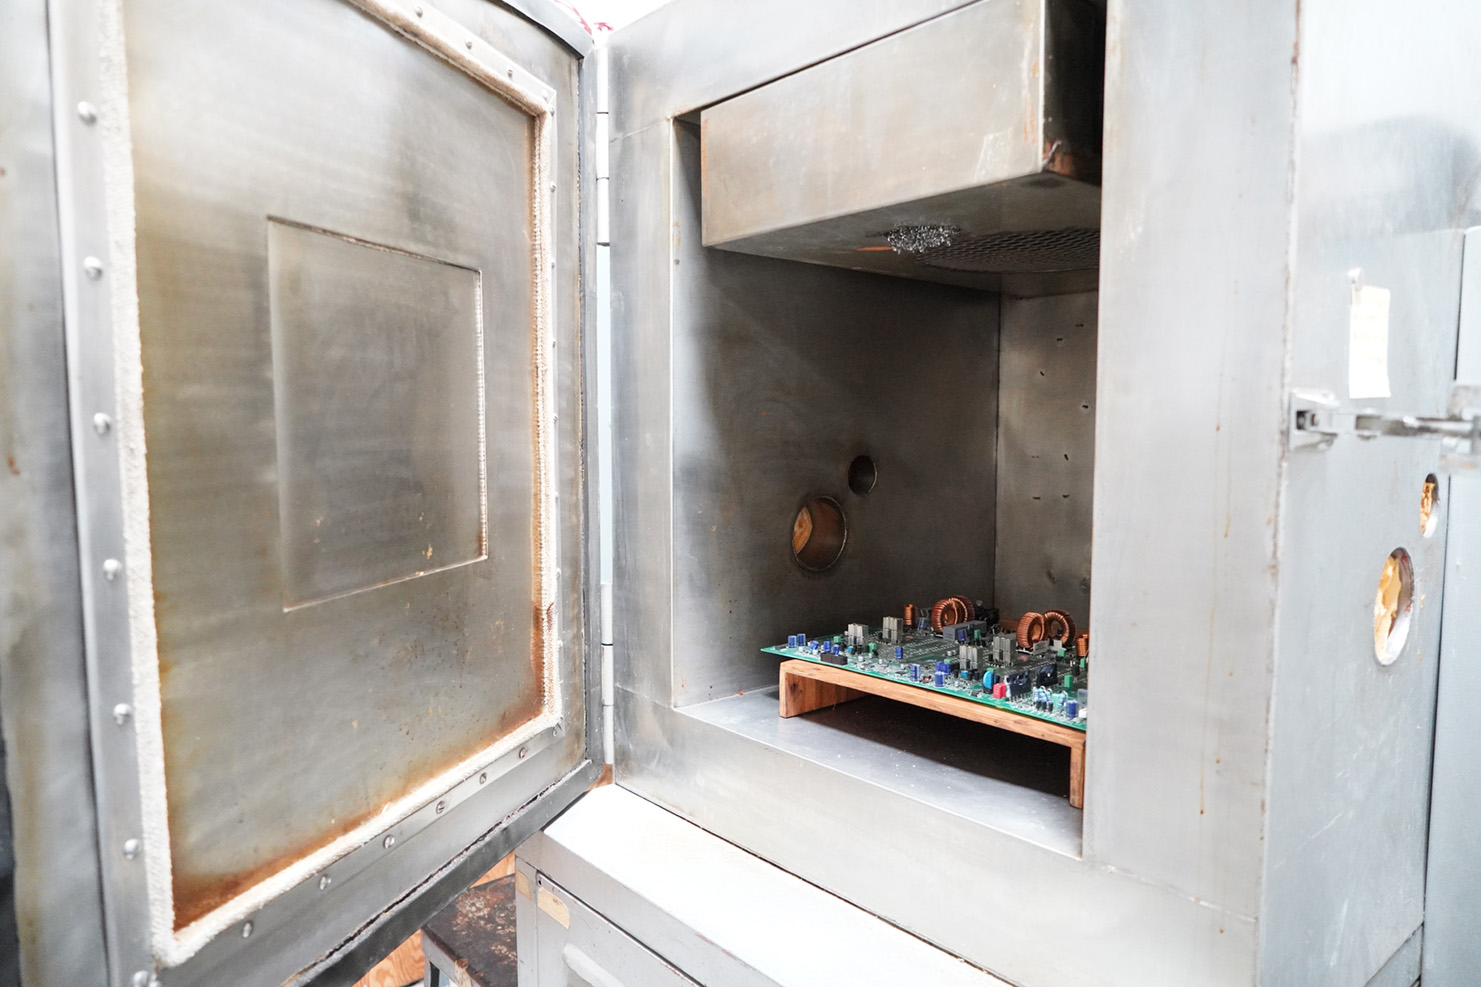 Image of commercial oven used to test for operation in hot environments